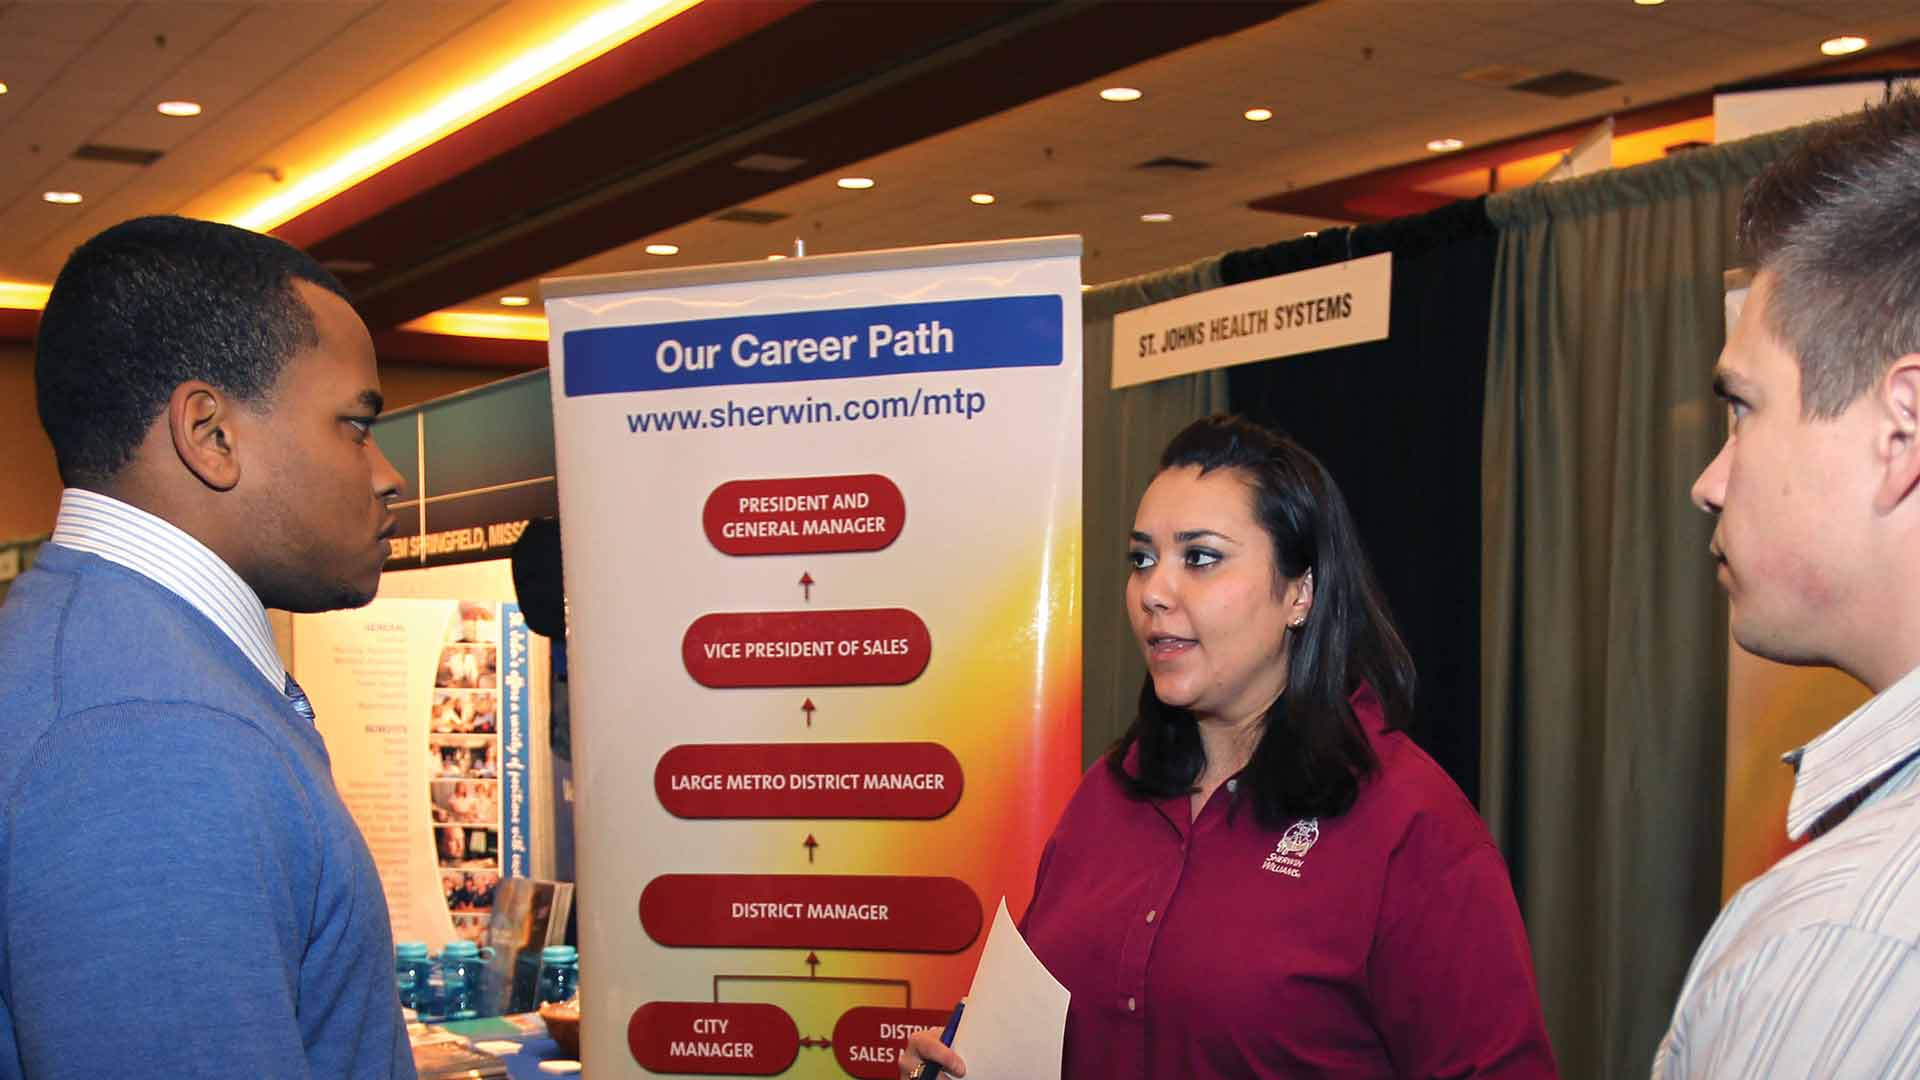 Three people are talking at a career fair